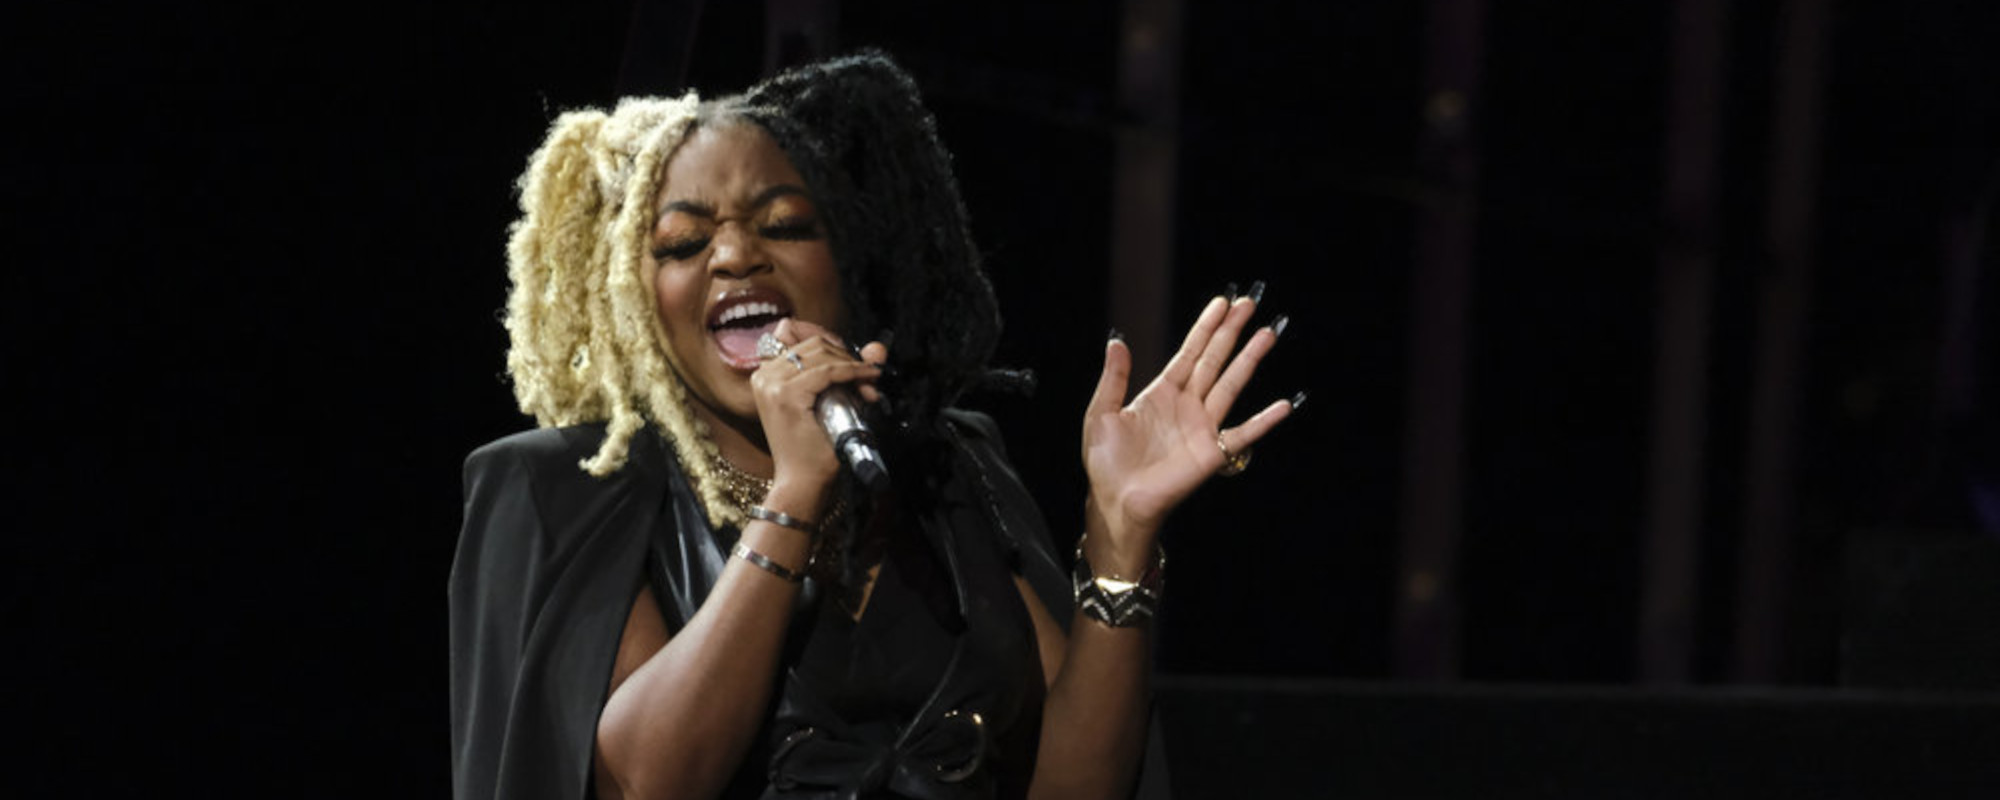 Libianca Takes on “Woman” by Doja Cat in Live Playoffs on ‘The Voice’